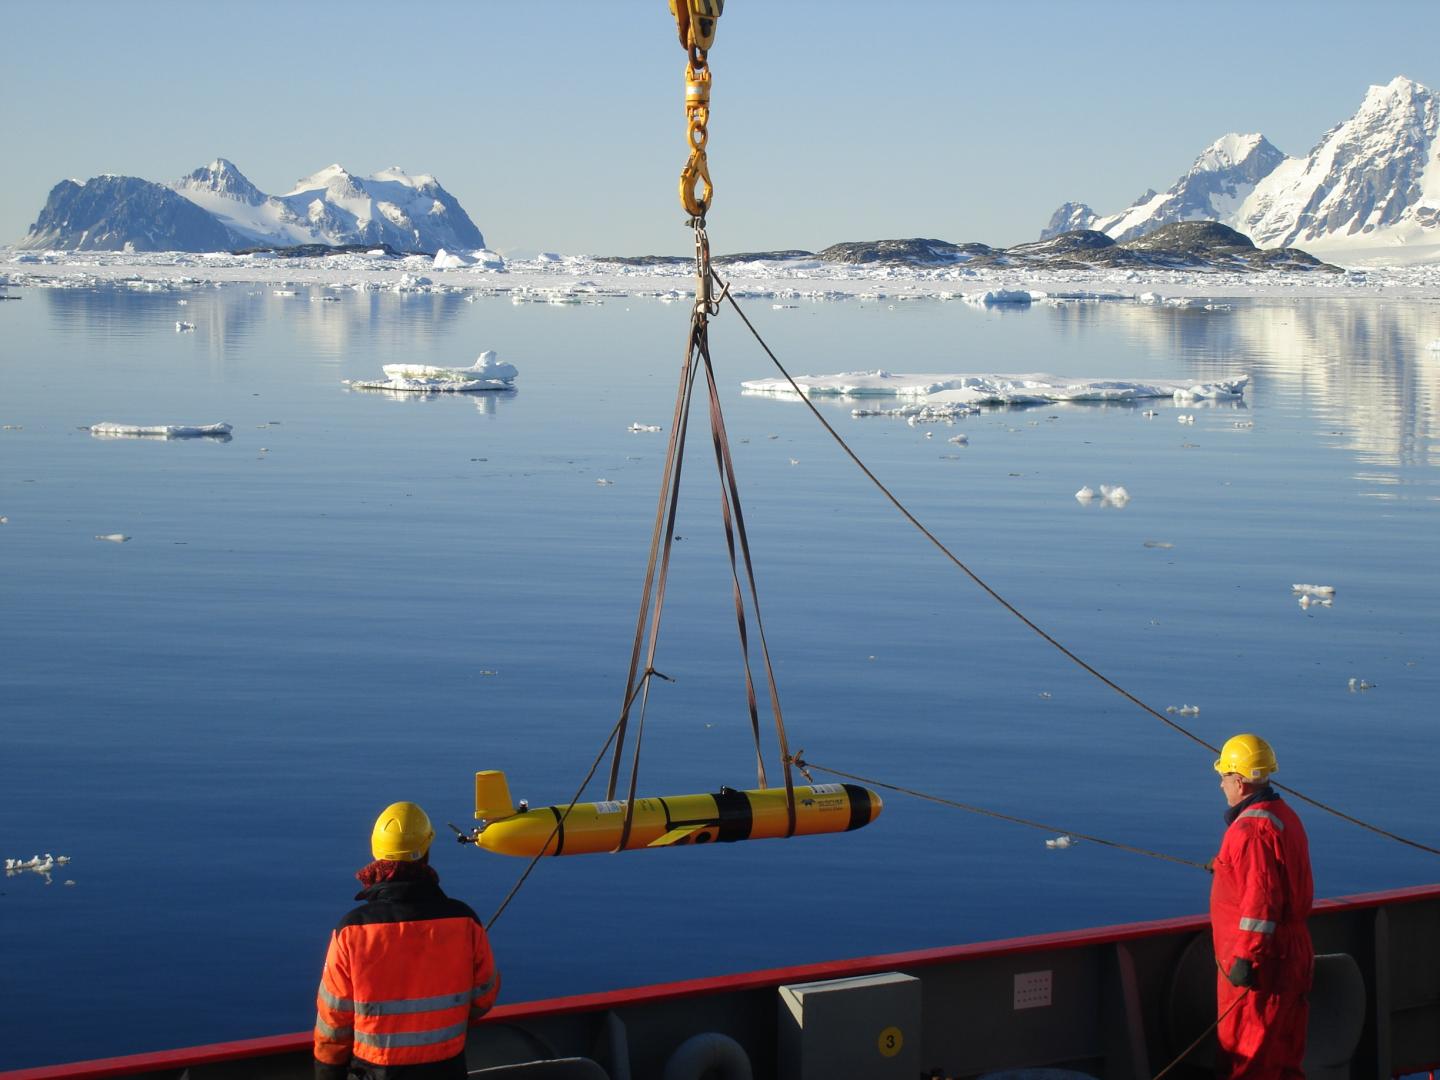 A team lower a polar robotic 'glider' into the water from the deck of a ship, with icebergs in the background